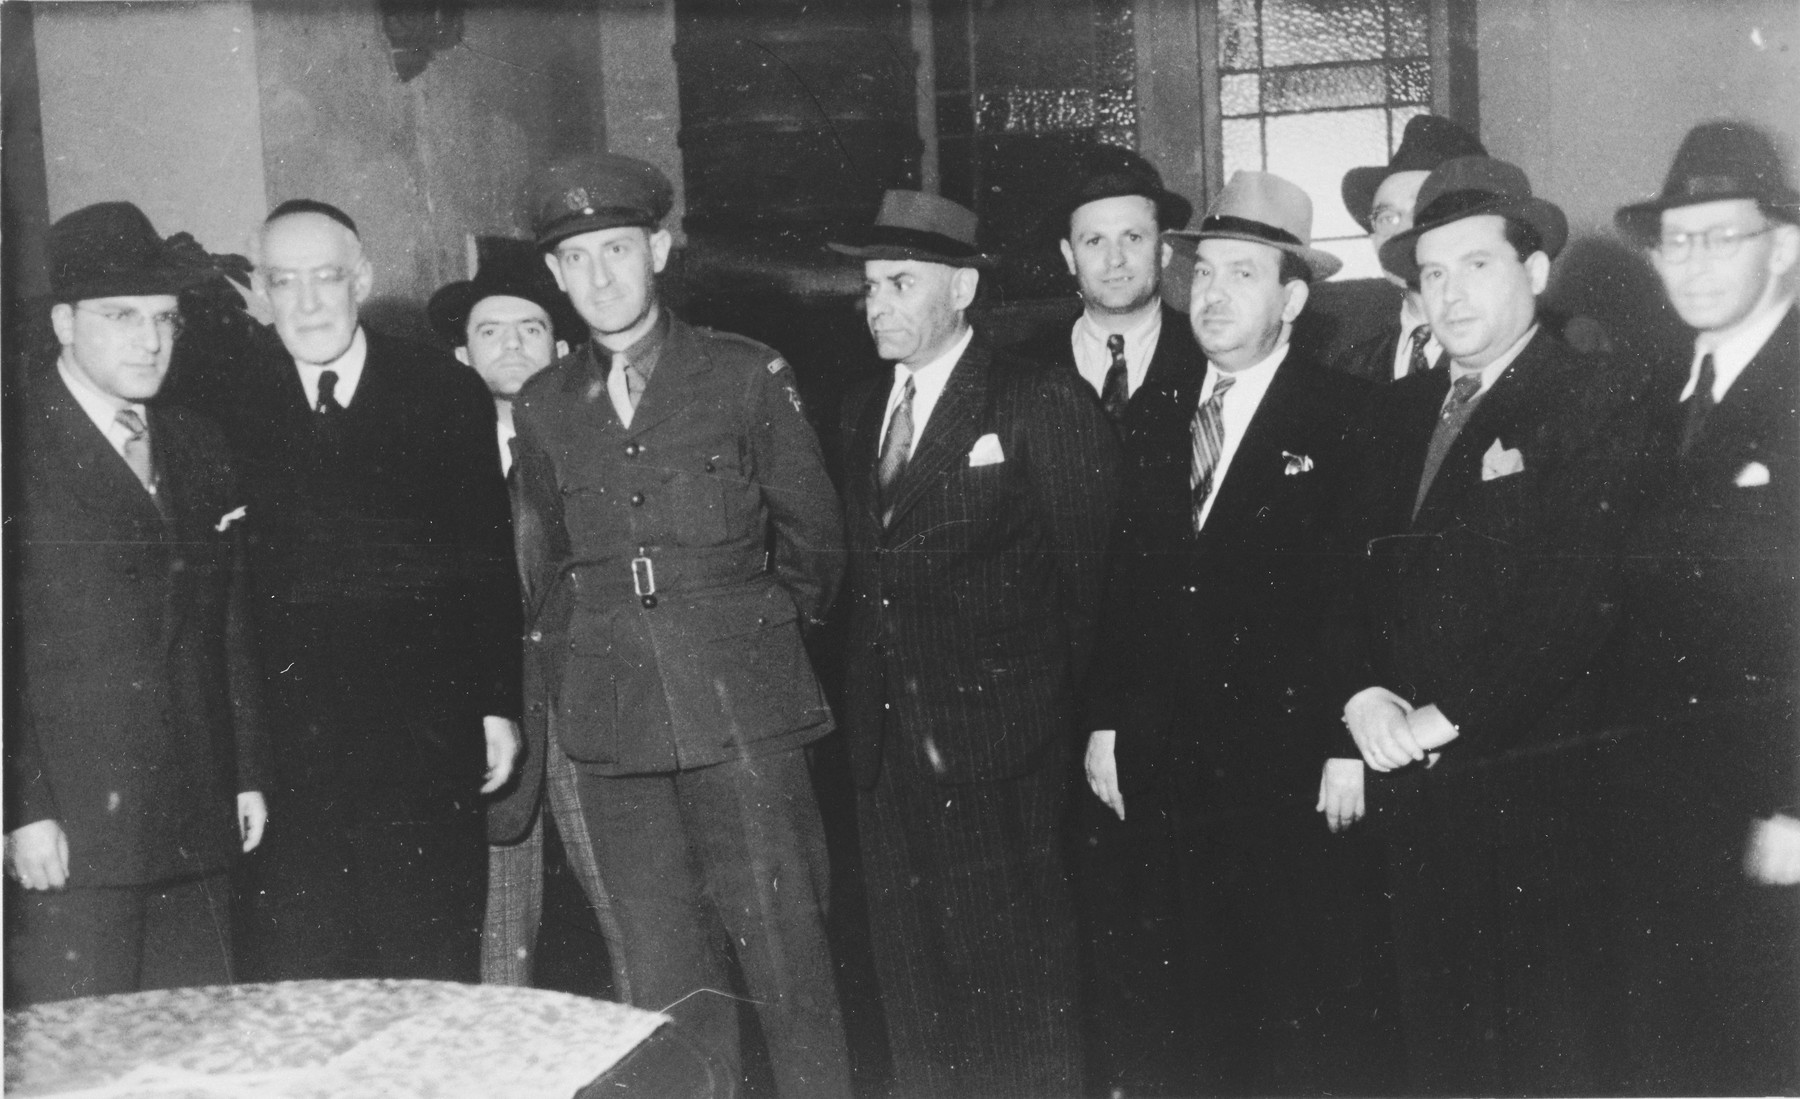 Rabbi Leo Baeck poses with a group of Jewish leaders during his three week visit to Germany.  Norbert Wollheim stands at the far left next to Baeck.

Baeck was greeted at the airport by Norbert Wollheim, Chairman of the Central Committee of Jews in the British Zone.  Baeck's trip included participation in an evangelical congress in Darmstadt on October 12, as well as numerous appearances before local Jewish communities.